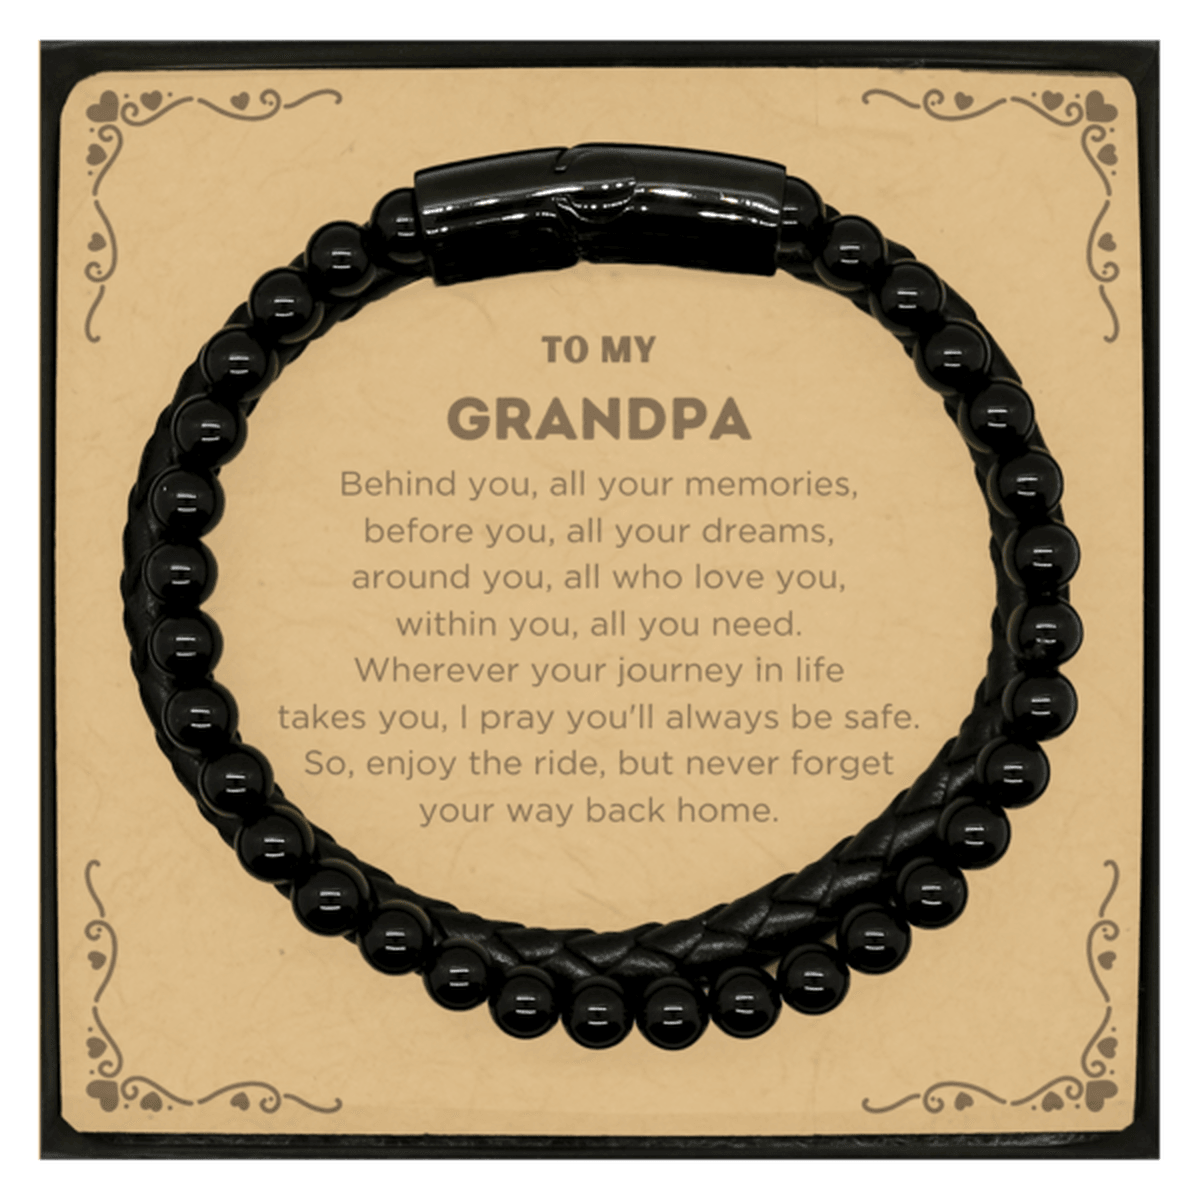 Grandpa Stone Leather Bracelets Birthday Christmas Gifts Behind you, all your memories, before you, all your dreams - Mallard Moon Gift Shop